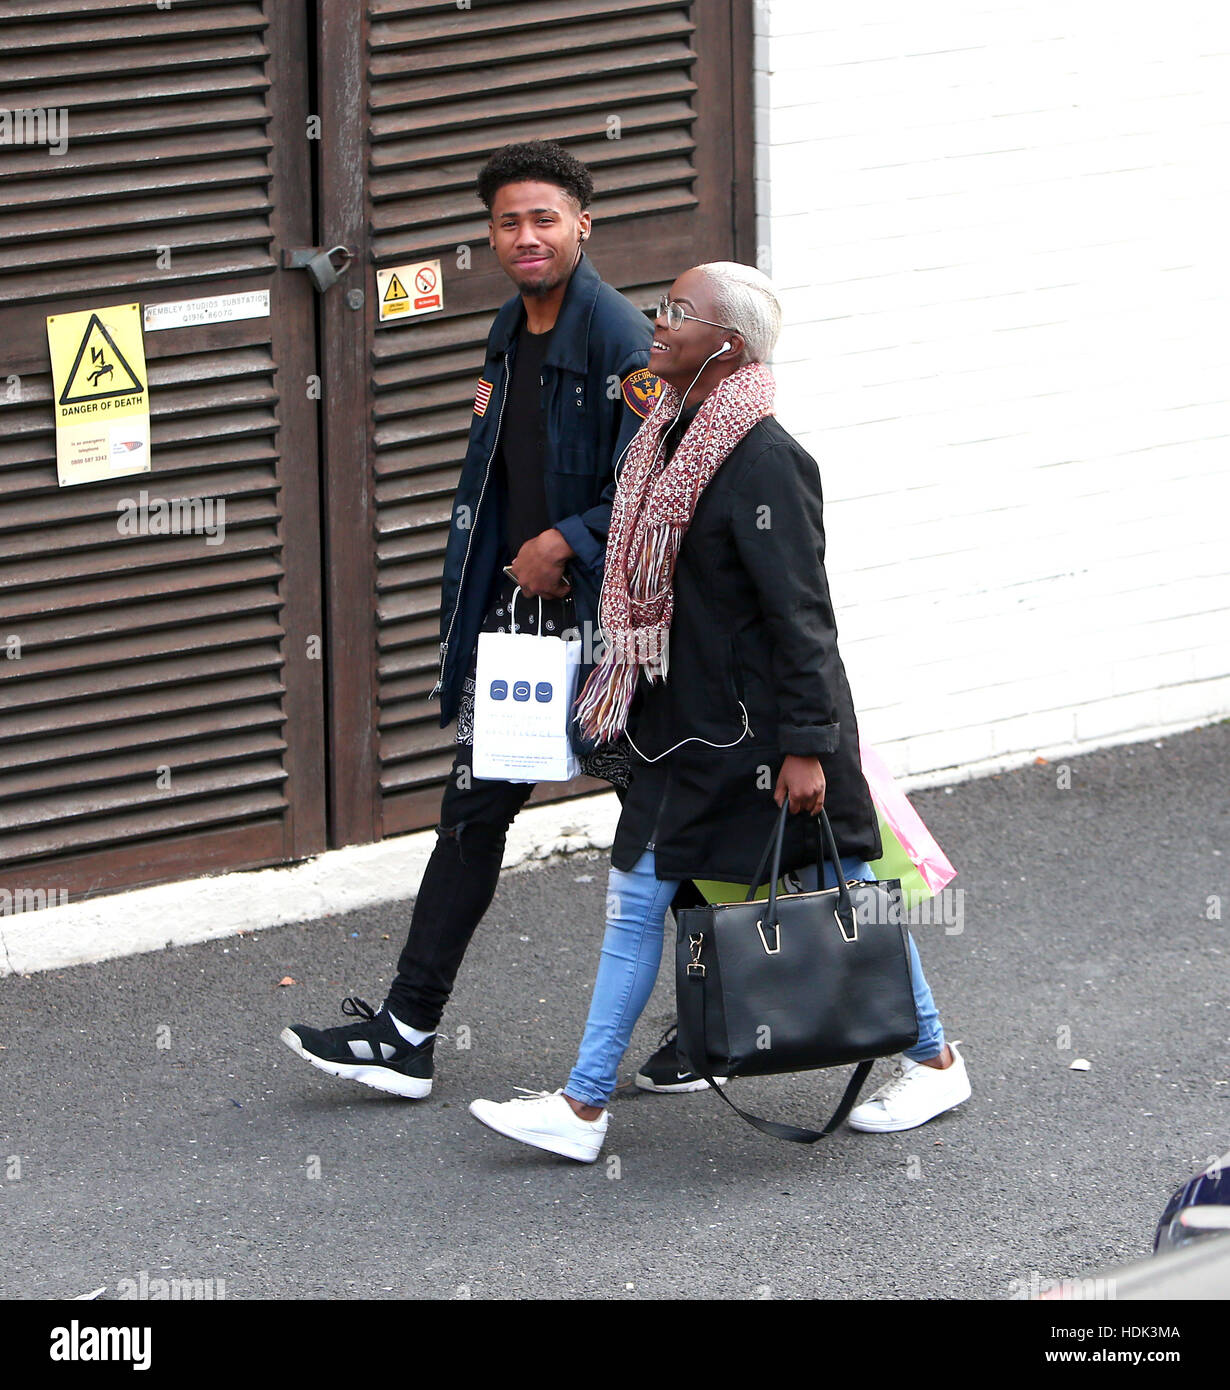 Lee and Louise arriving at the X Factor Studios, in London, for their first